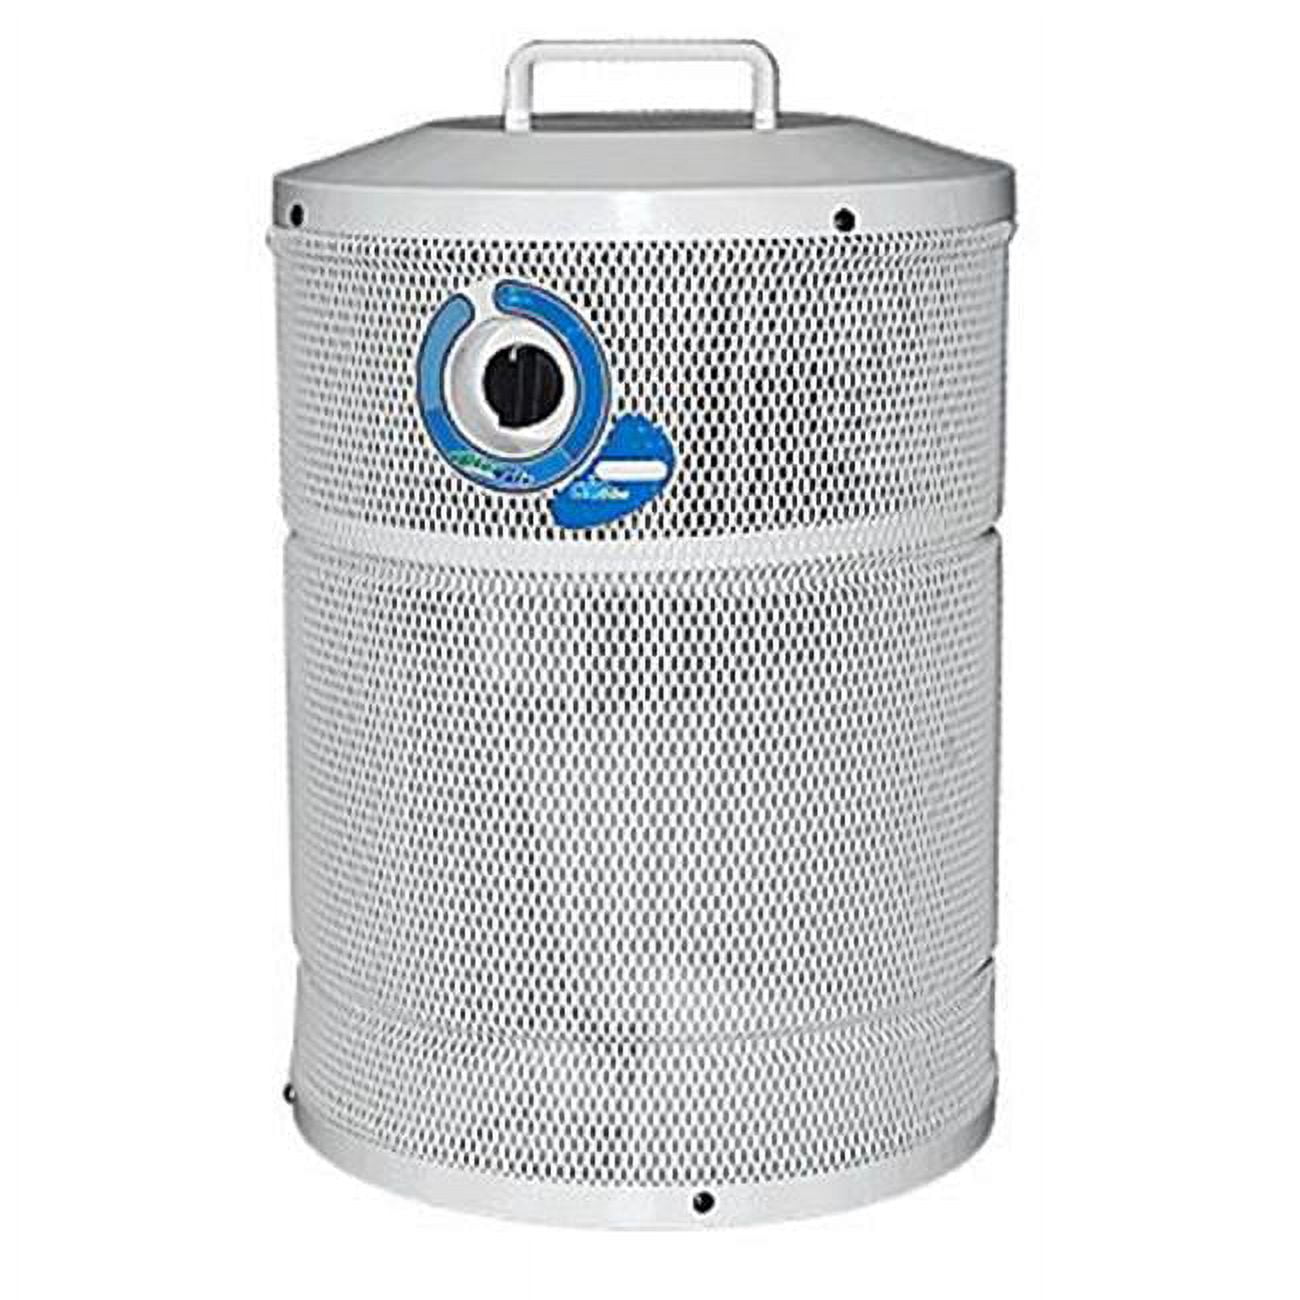 Picture of Allerair Industries ATAST1022231 Airmed 3 Exec-UV Activated with Carbon Filter